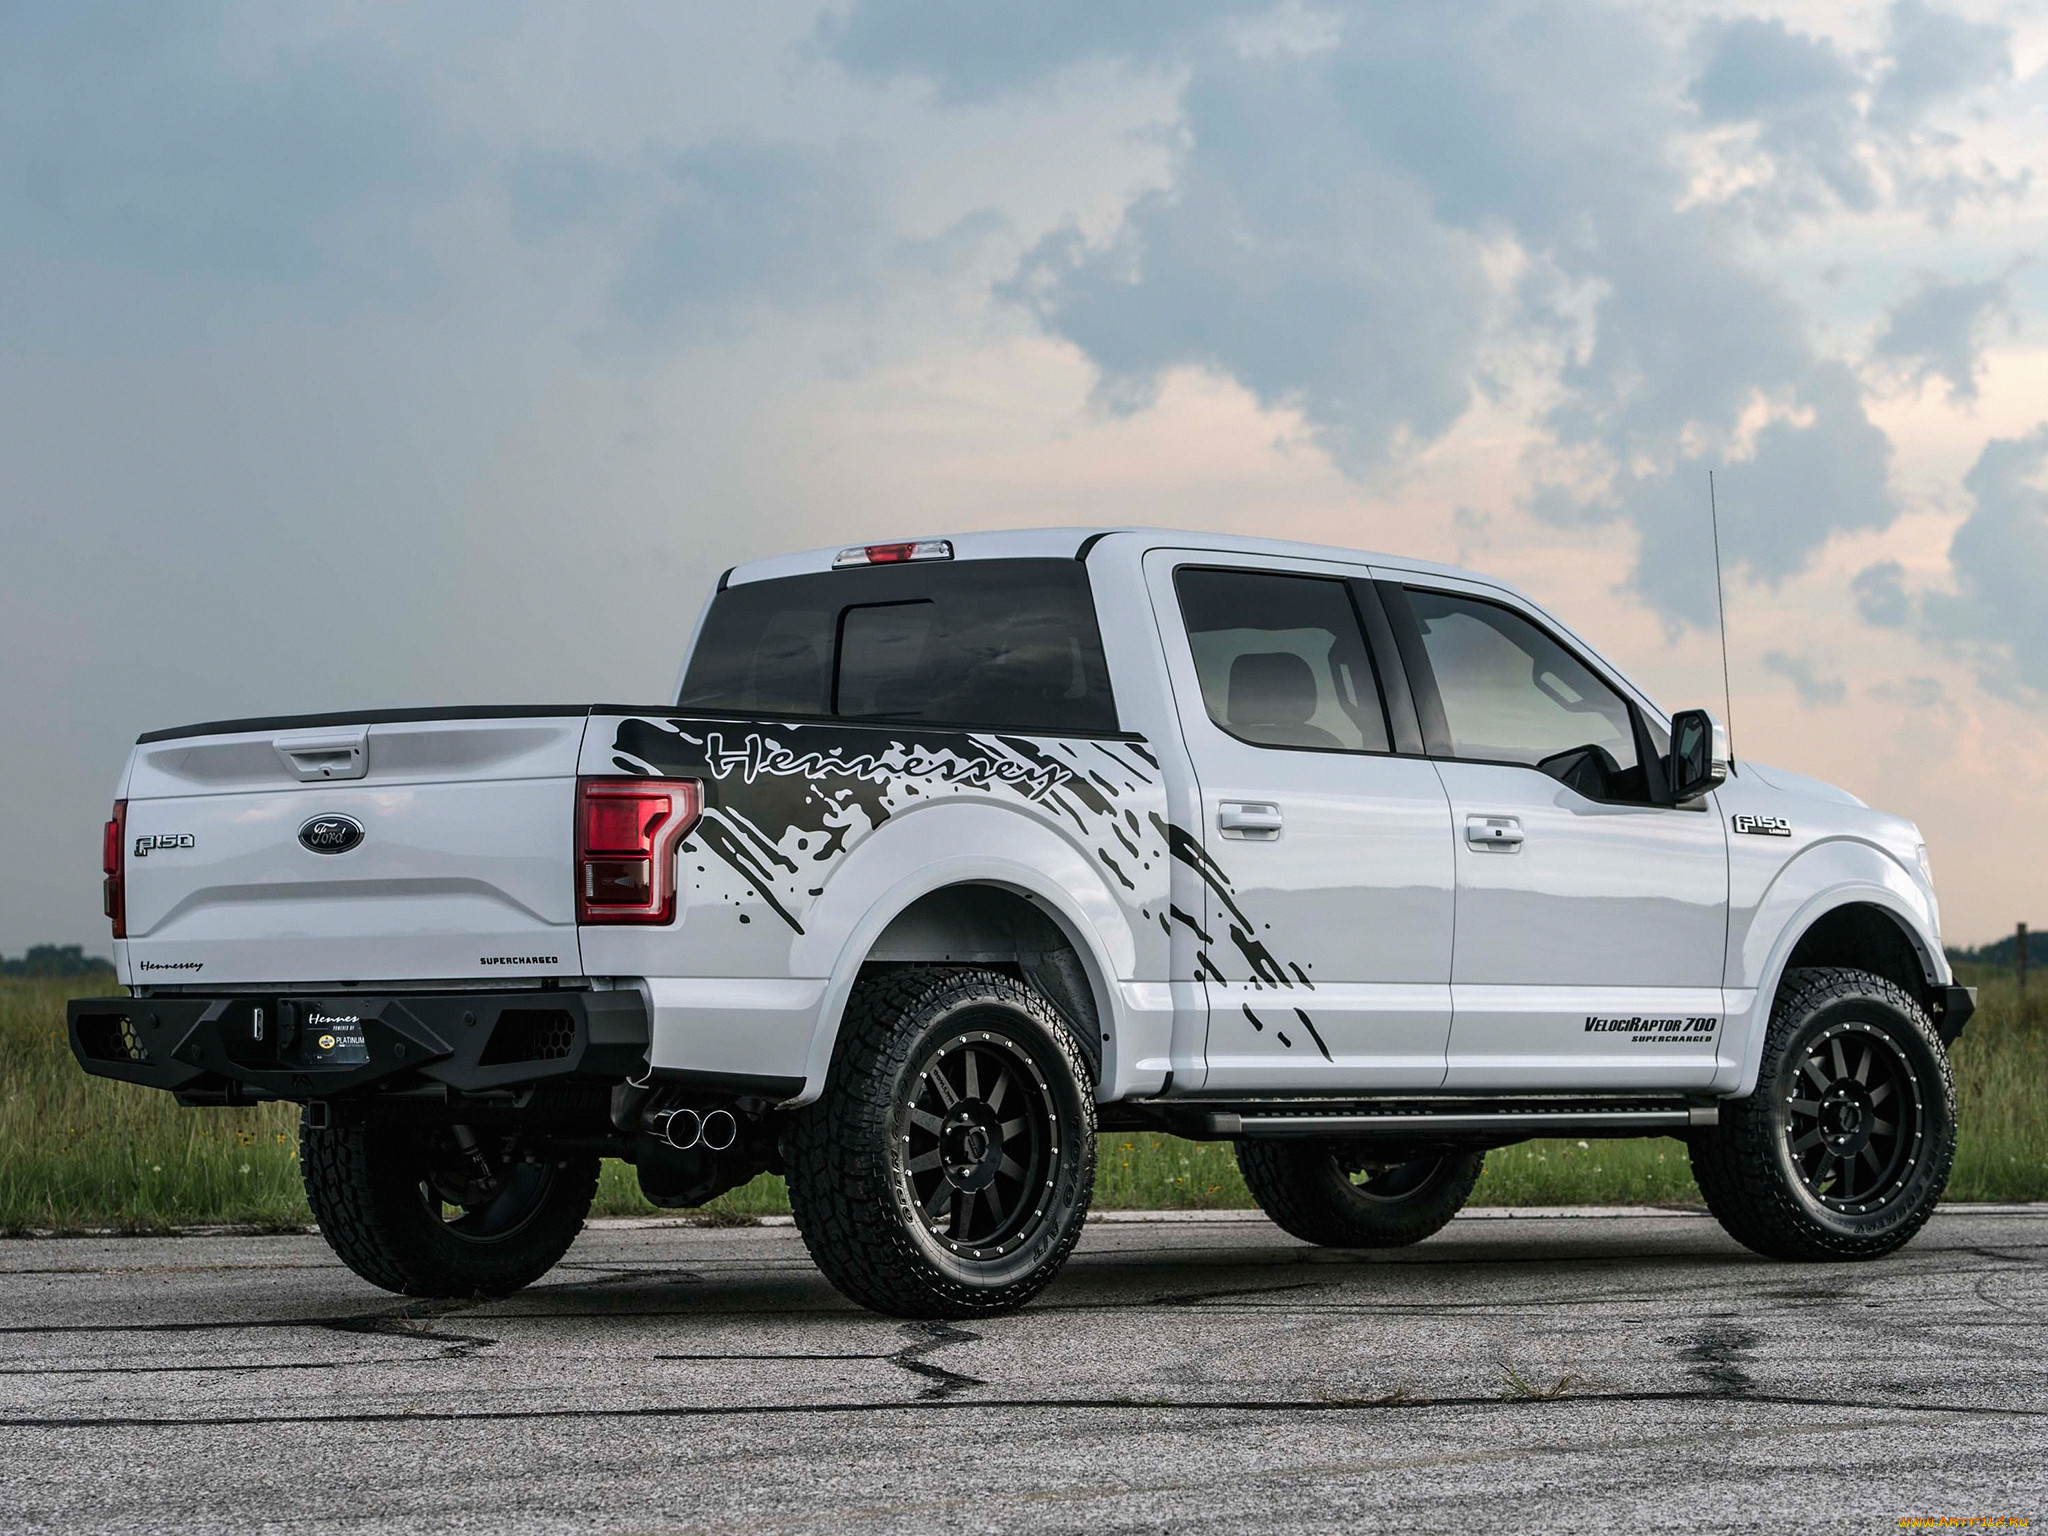 , ford, supercharged, velociraptor, 700, hennessey, 2016